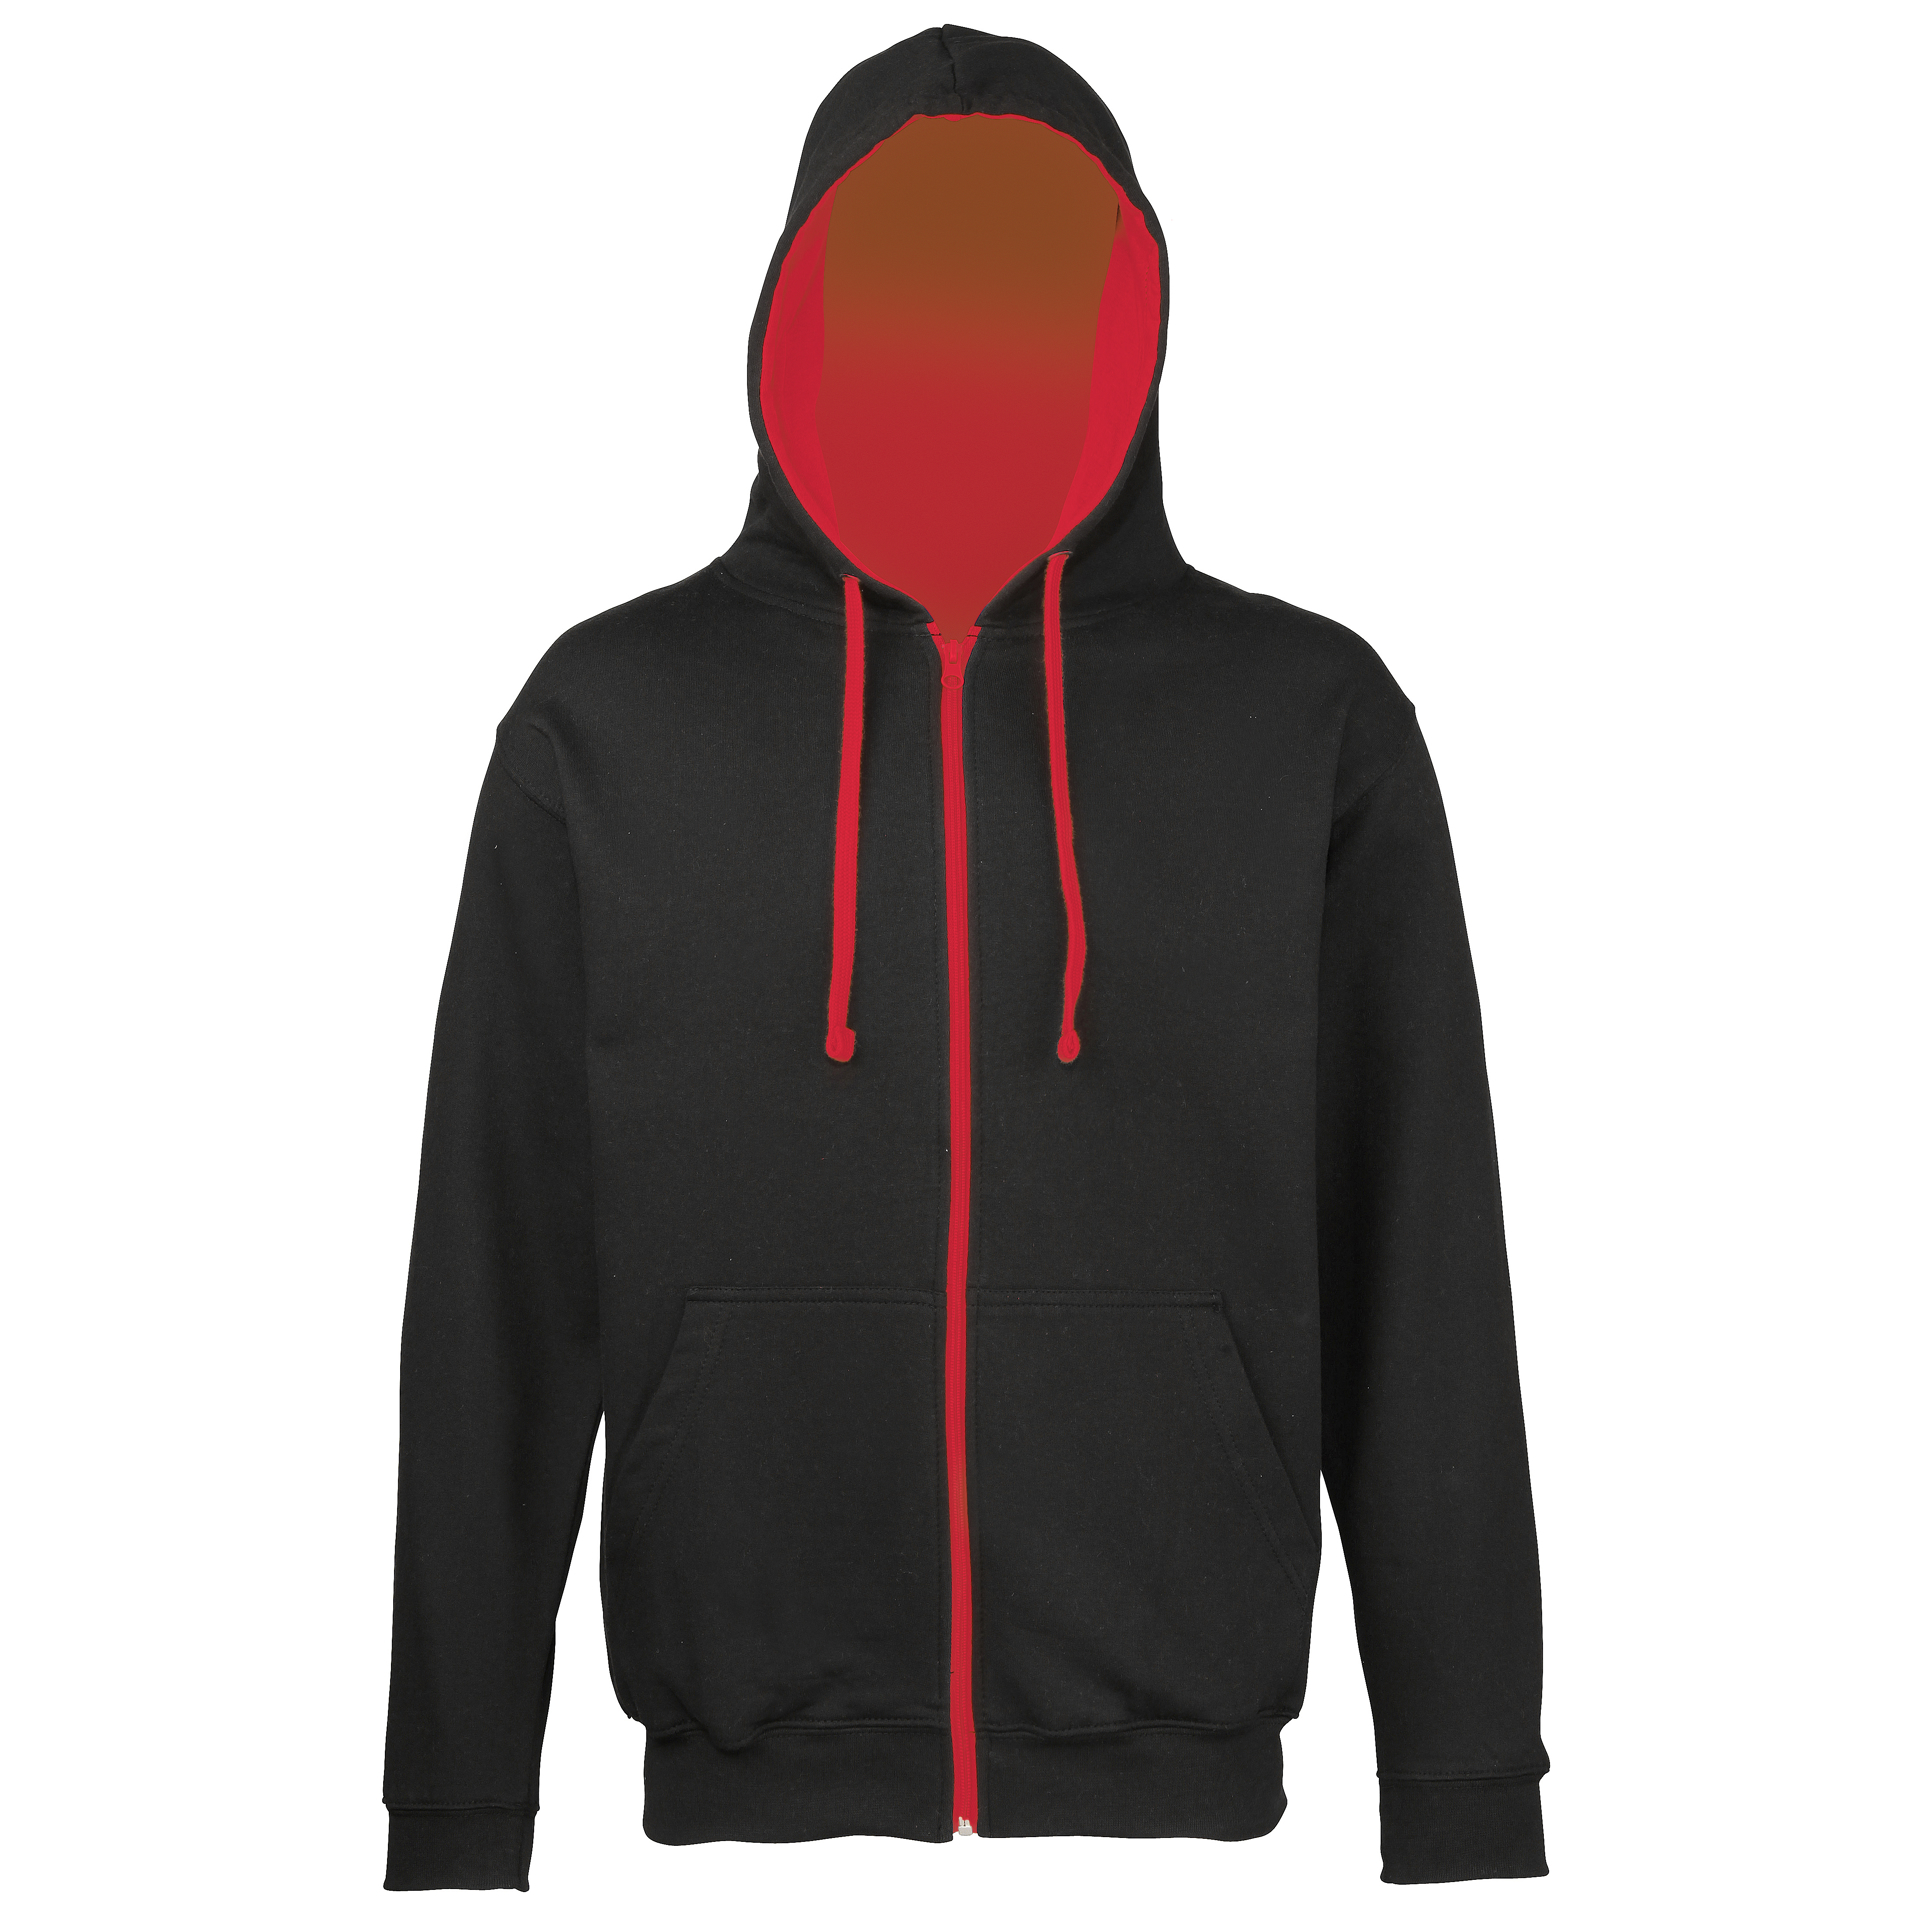 Men's Varsity Hoodie in black with red details and lining